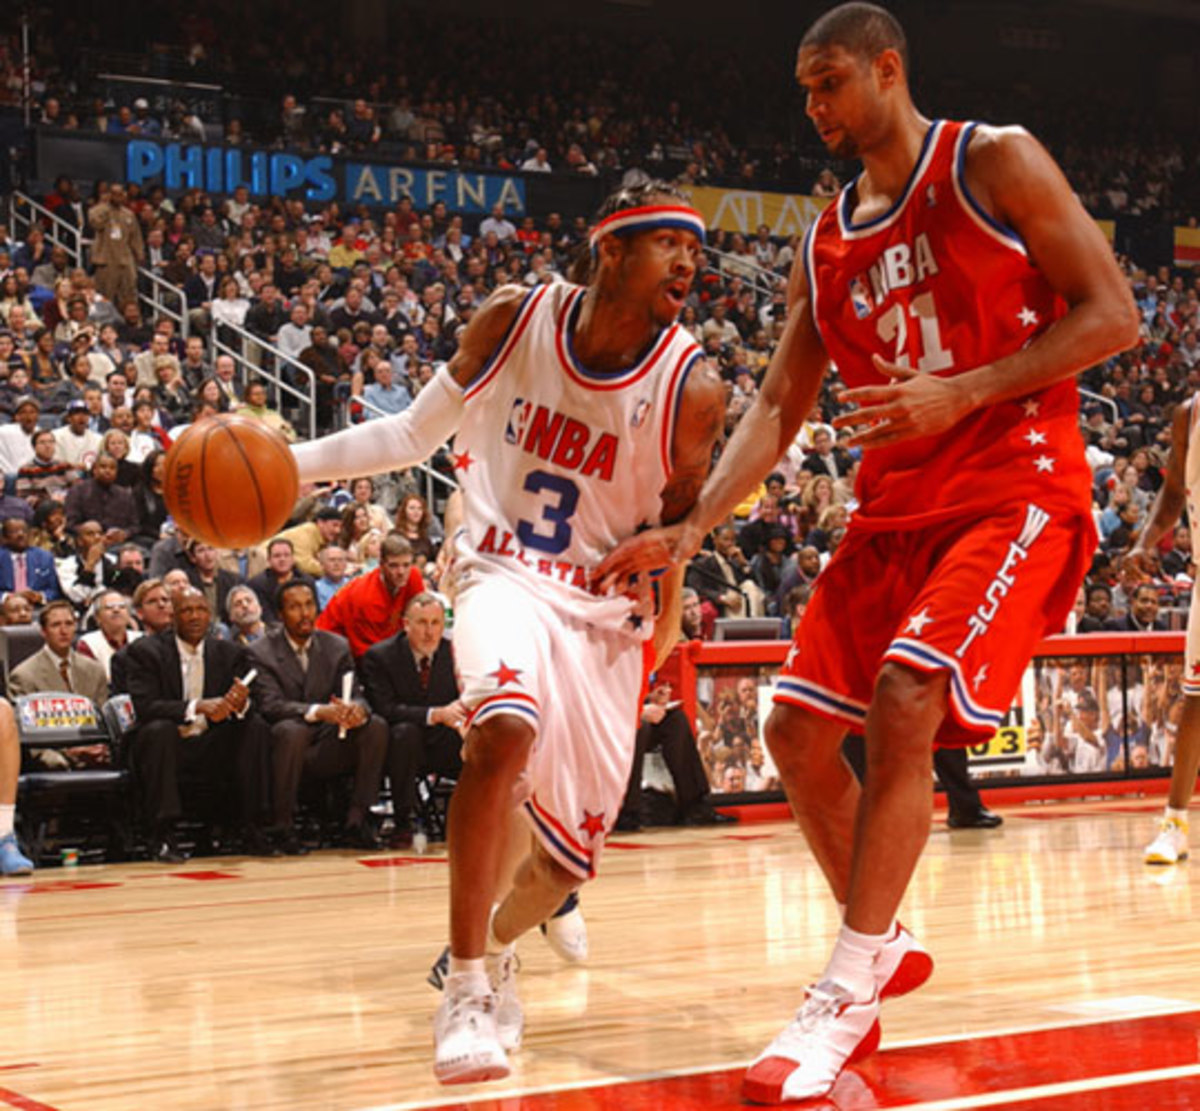 Allen Iverson drives to the basket against Tim Duncan during the 2003 NBA All-Star Game. (Getty Images)